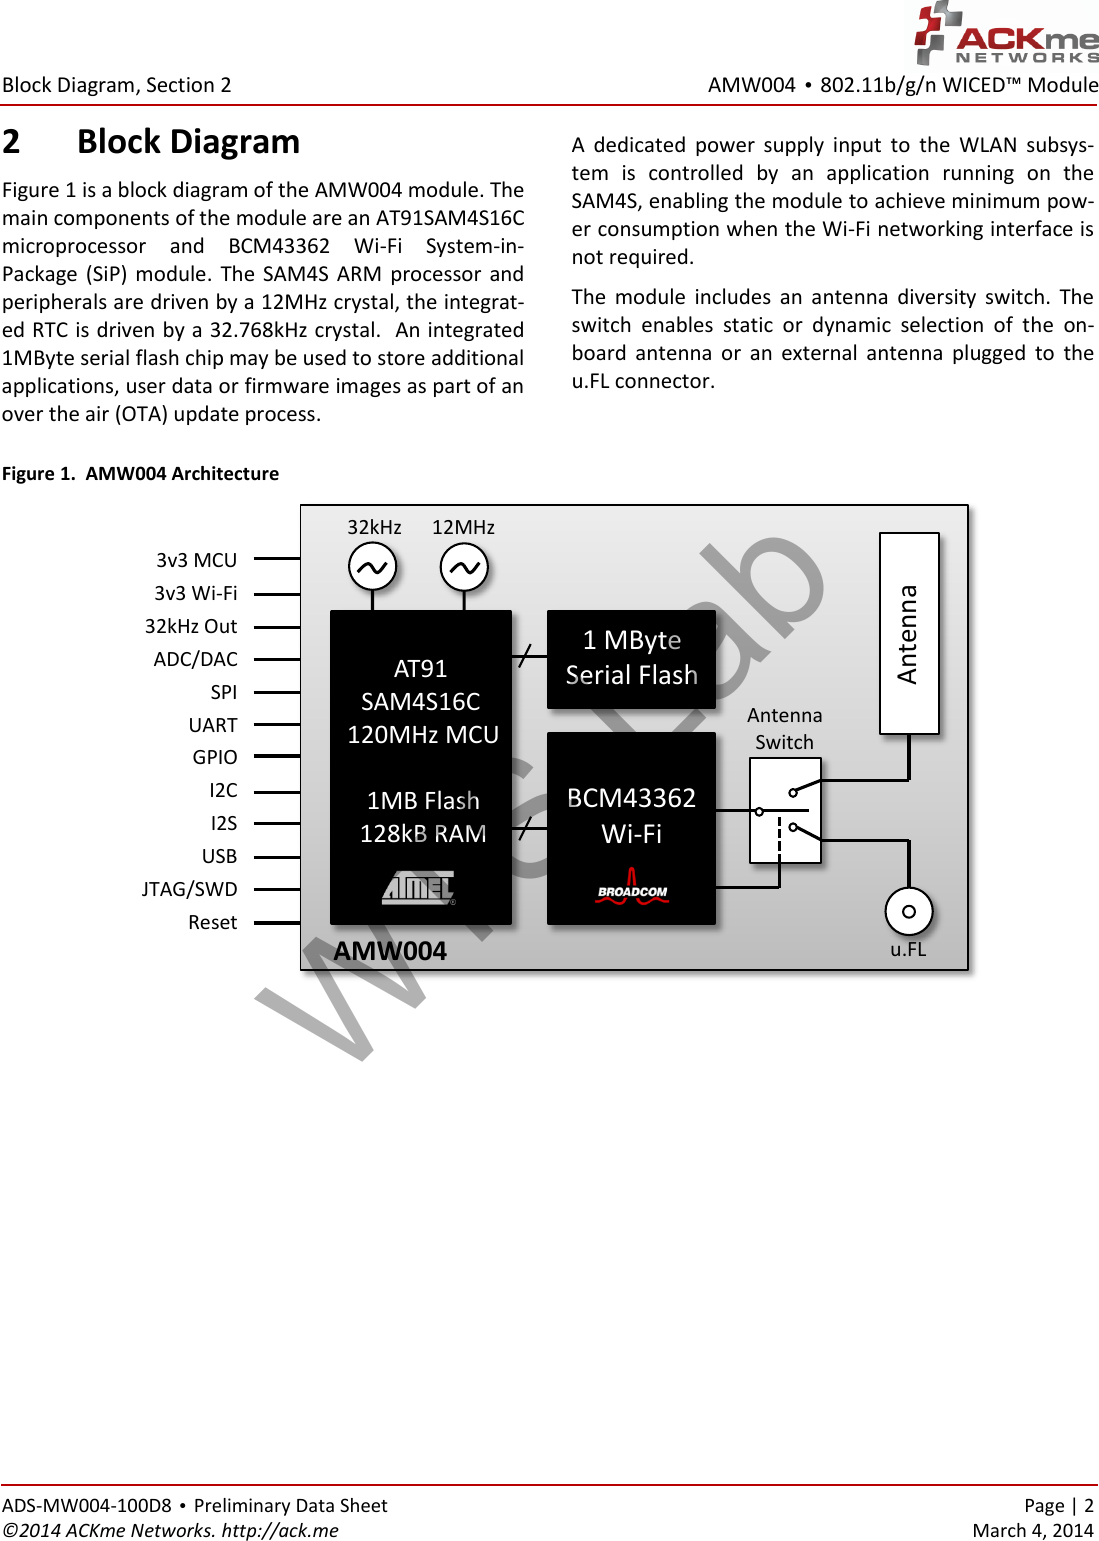 AMW004 • 802.11b/g/n WICED™ Module  Block Diagram, Section 2 ADS-MW004-100D8 • Preliminary Data Sheet    Page | 2 ©2014 ACKme Networks. http://ack.me    March 4, 2014 2 Block Diagram Figure 1 is a block diagram of the AMW004 module. The main components of the module are an AT91SAM4S16C microprocessor  and  BCM43362  Wi-Fi  System-in-Package  (SiP)  module.  The  SAM4S ARM  processor  and peripherals are driven by a 12MHz crystal, the integrat-ed RTC is driven by a 32.768kHz crystal.  An integrated 1MByte serial flash chip may be used to store additional applications, user data or firmware images as part of an over the air (OTA) update process. A  dedicated  power  supply  input  to  the  WLAN  subsys-tem  is  controlled  by  an  application  running  on  the SAM4S, enabling the module to achieve minimum pow-er consumption when the Wi-Fi networking interface is not required.  The  module  includes  an  antenna  diversity  switch.  The switch  enables  static  or  dynamic  selection  of  the  on-board  antenna  or  an  external  antenna  plugged  to  the u.FL connector.  Figure 1.  AMW004 Architecture       AT91 SAM4S16C 120MHz MCU  1MB Flash 128kB RAM     BCM43362 Wi-Fi  Antenna Antenna Switch u.FL  3v3 MCU 3v3 Wi-Fi 32kHz Out ADC/DAC SPI UART GPIO I2C I2S USB JTAG/SWD Reset  12MHz   32kHz 1 MByte  Serial Flash Wi-Fi AMW004 WTS-Lab